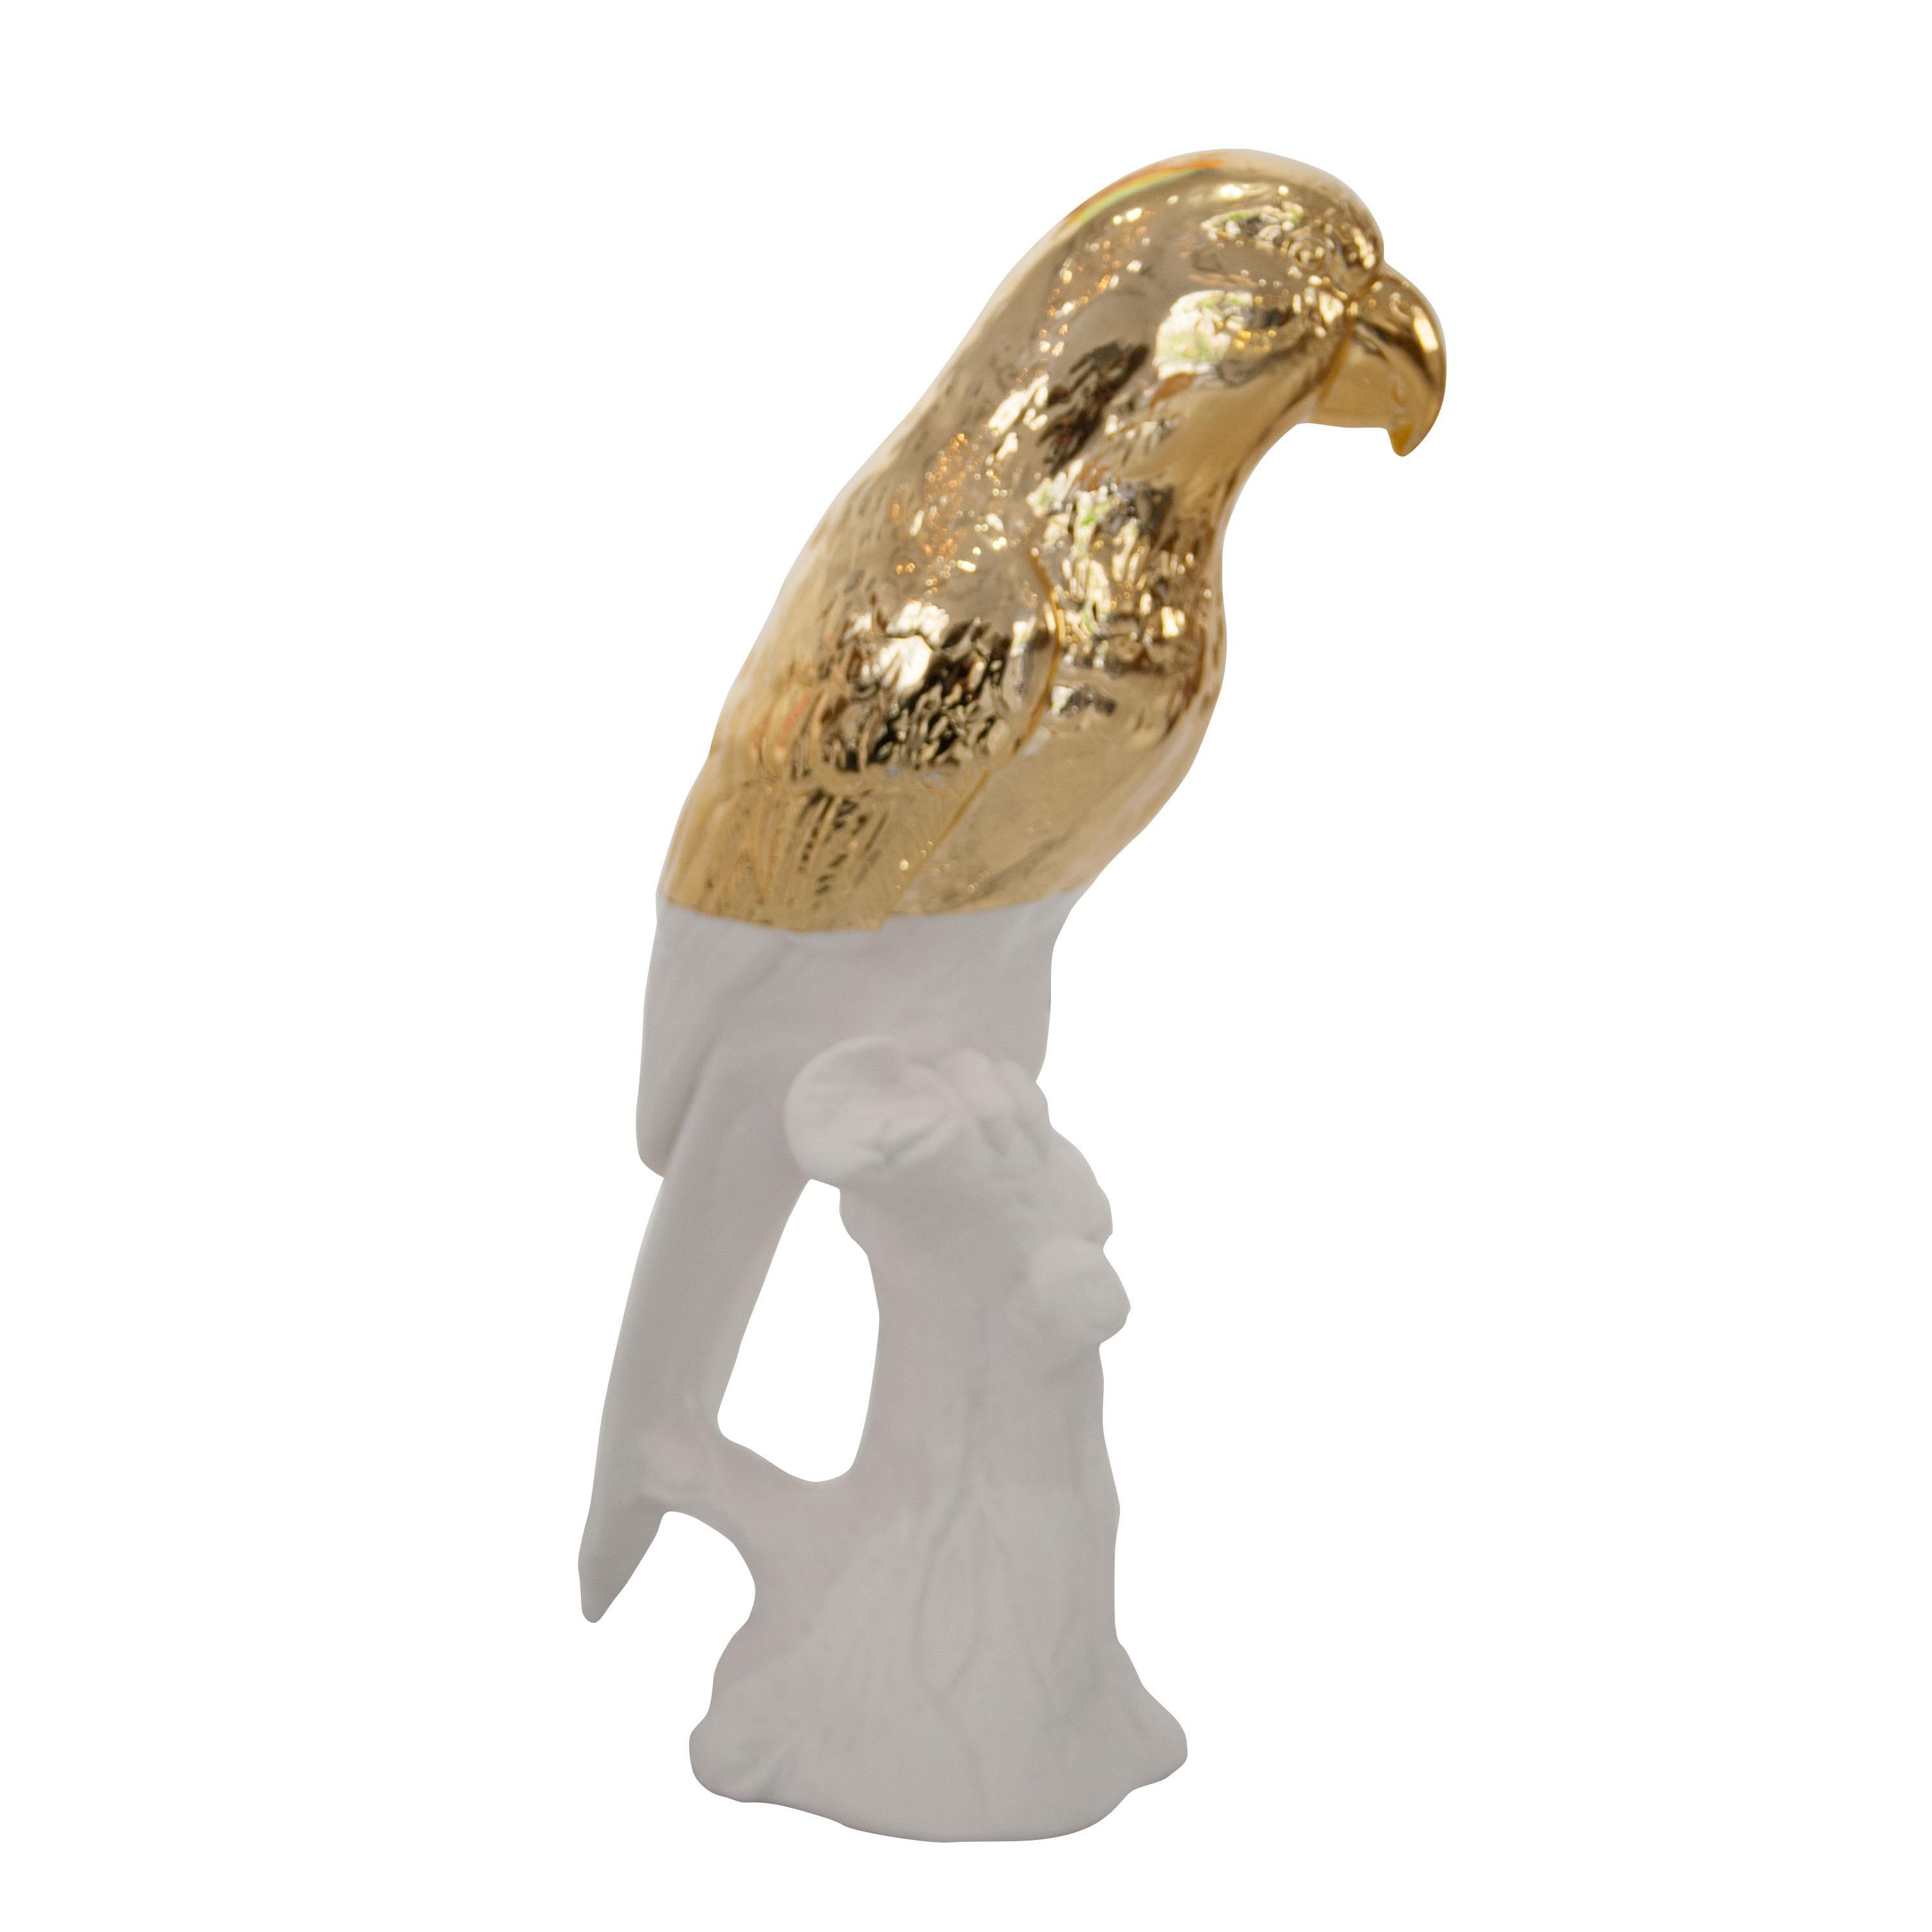 Ceramic parrot figure in white and gold finish.